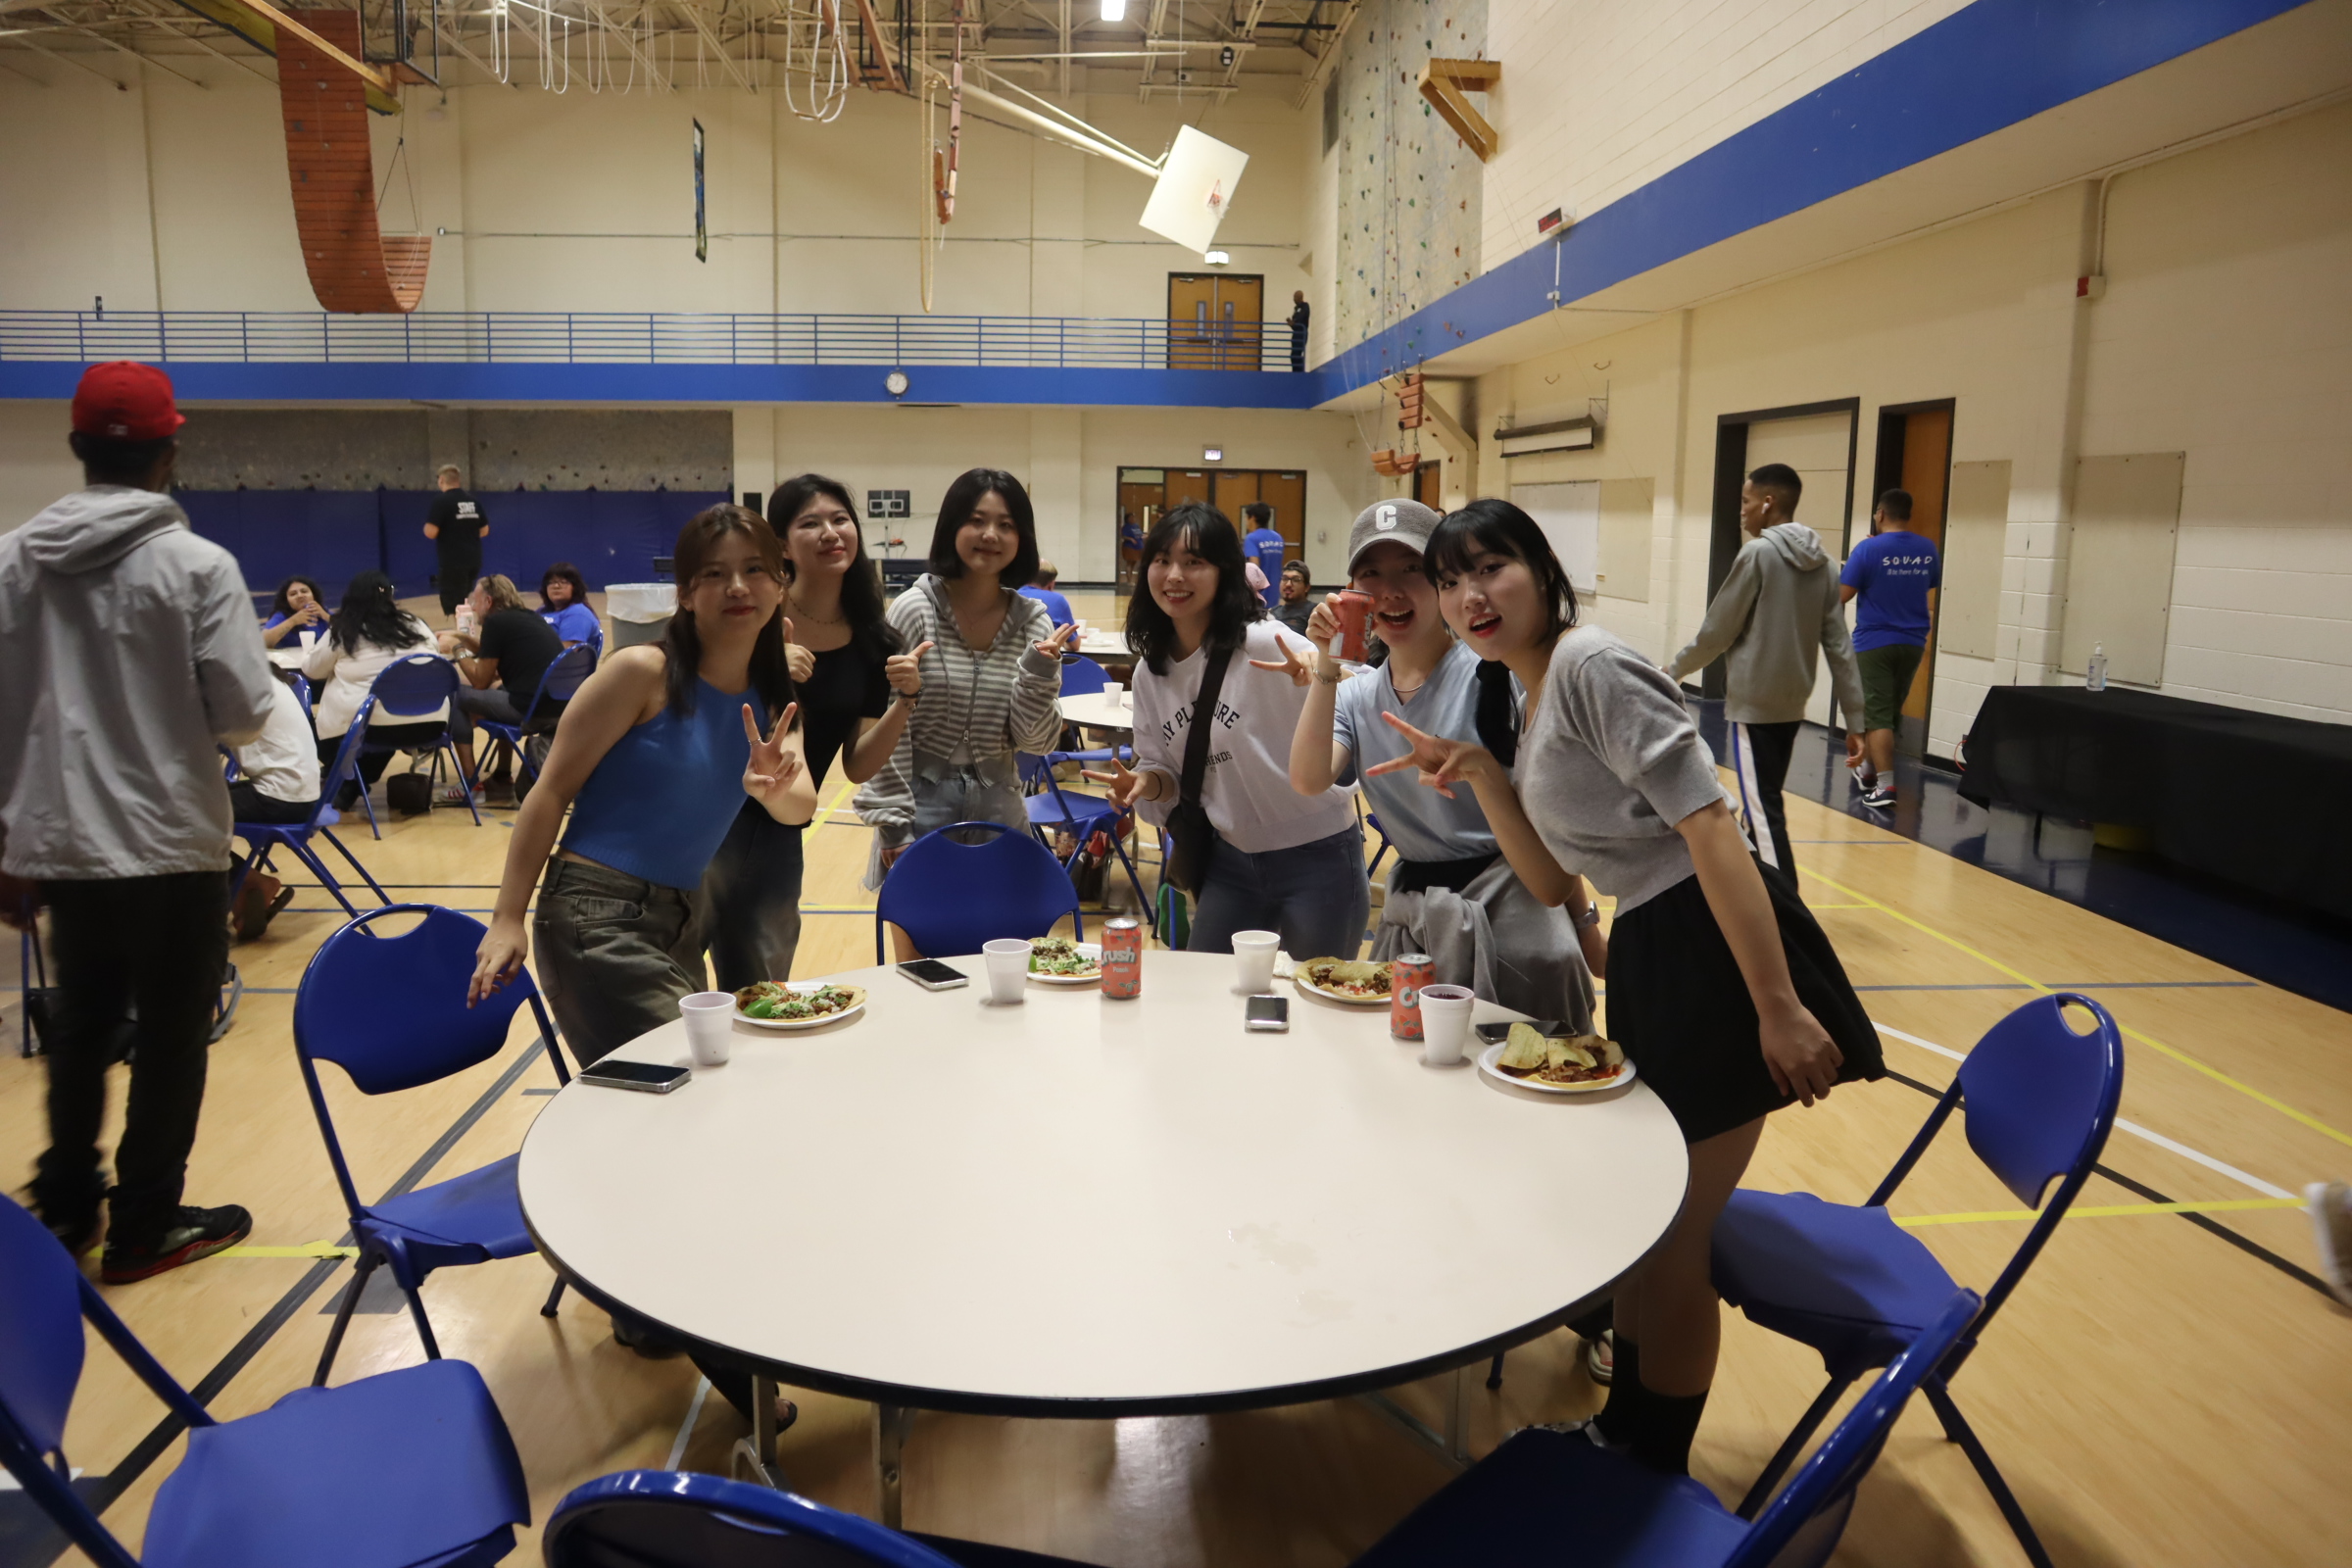 Students posing for a picture at a table